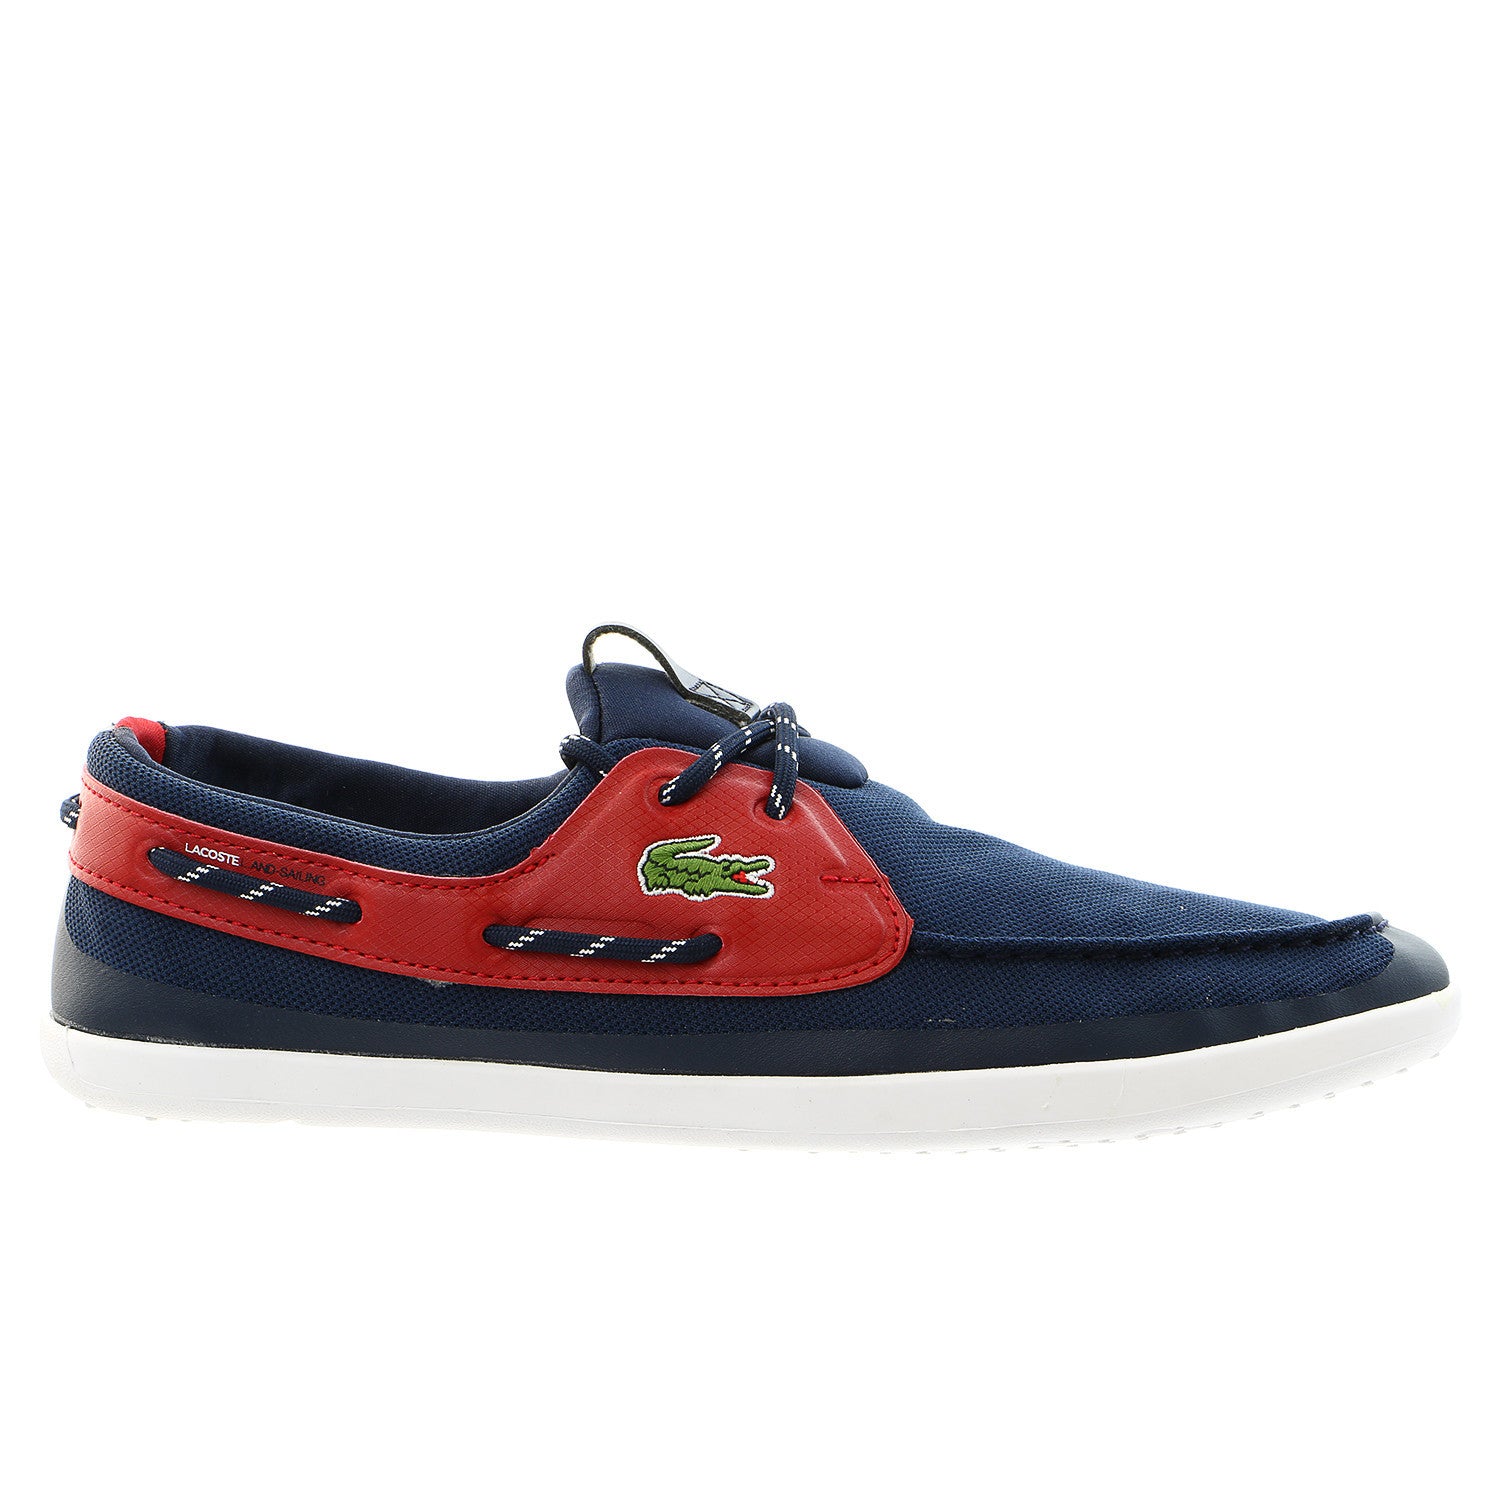 lacoste moccasins, OFF 70%,Buy!